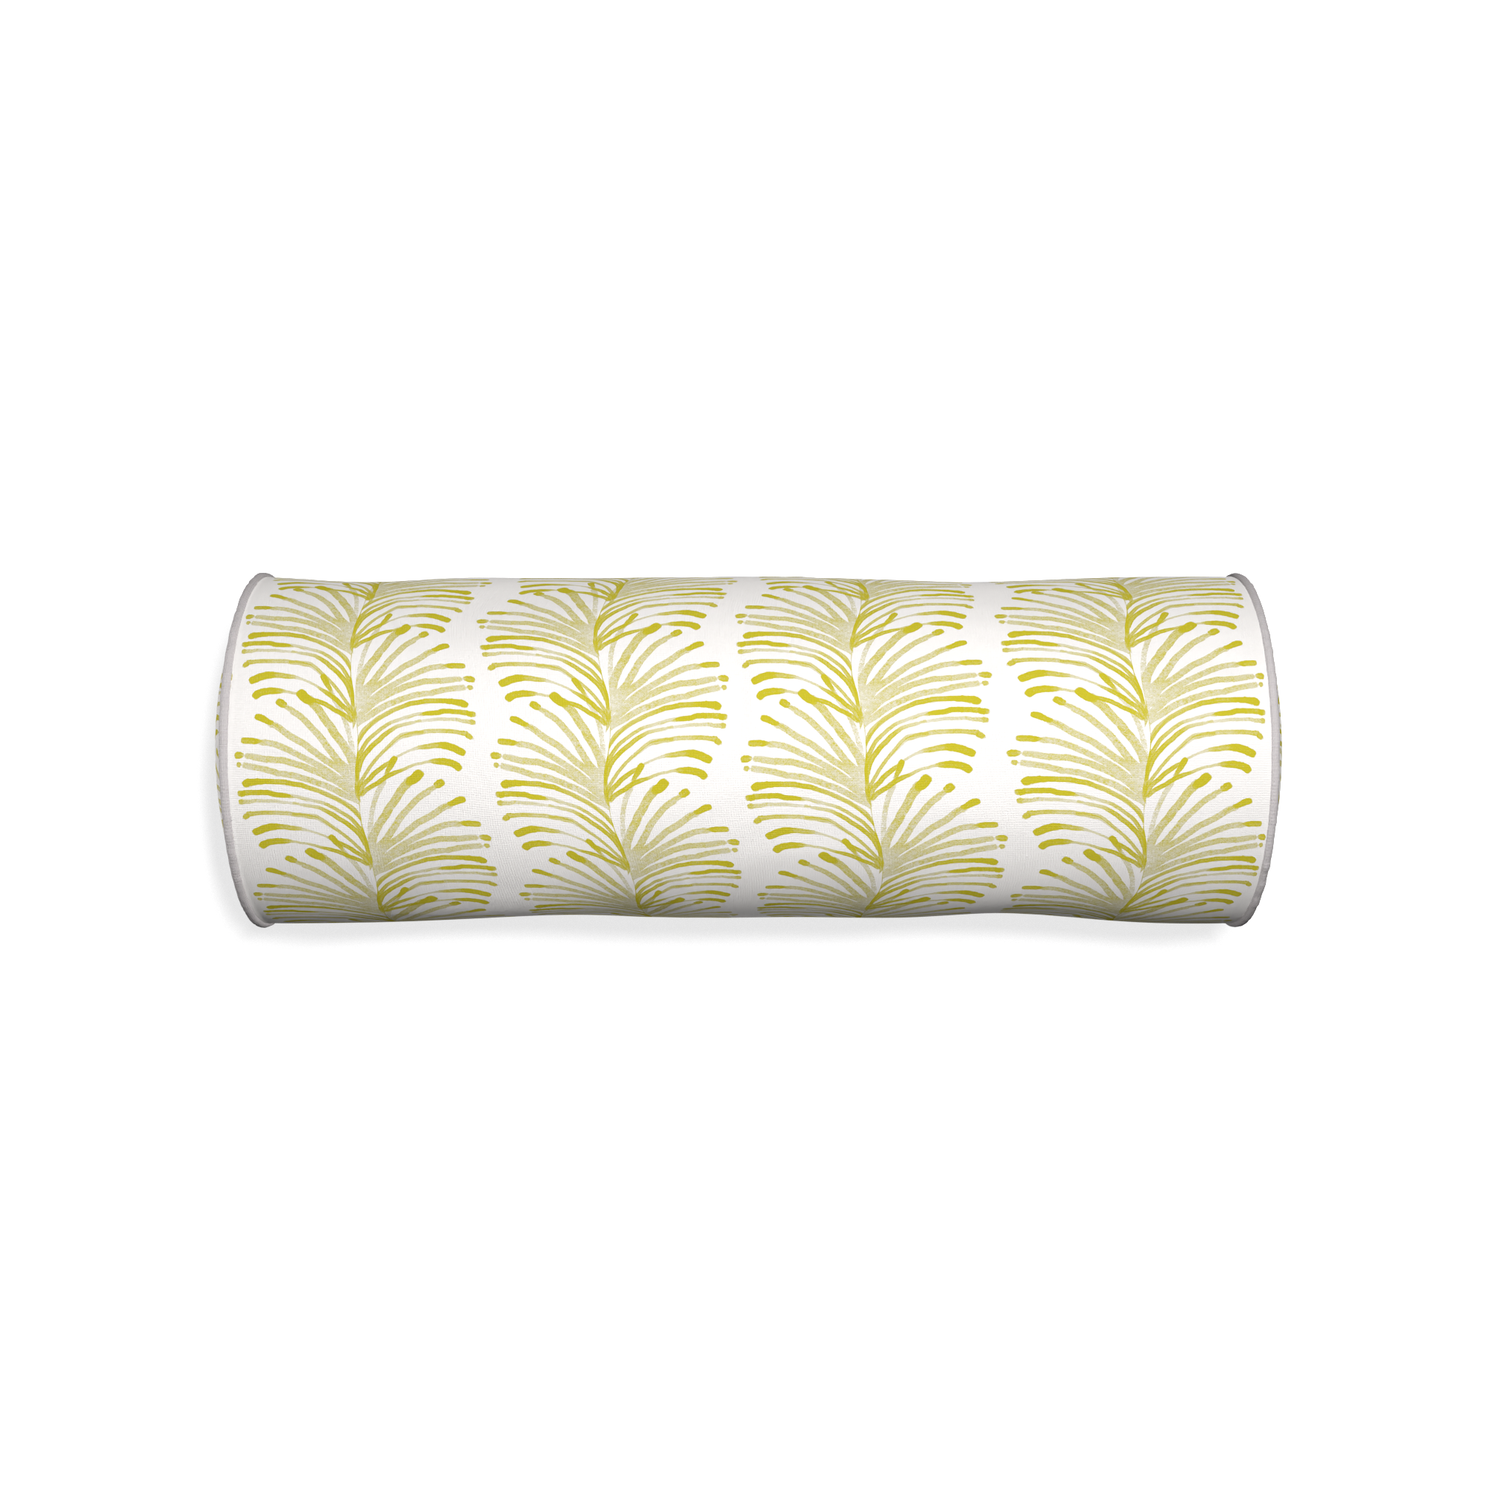 Bolster emma chartreuse custom pillow with pebble piping on white background